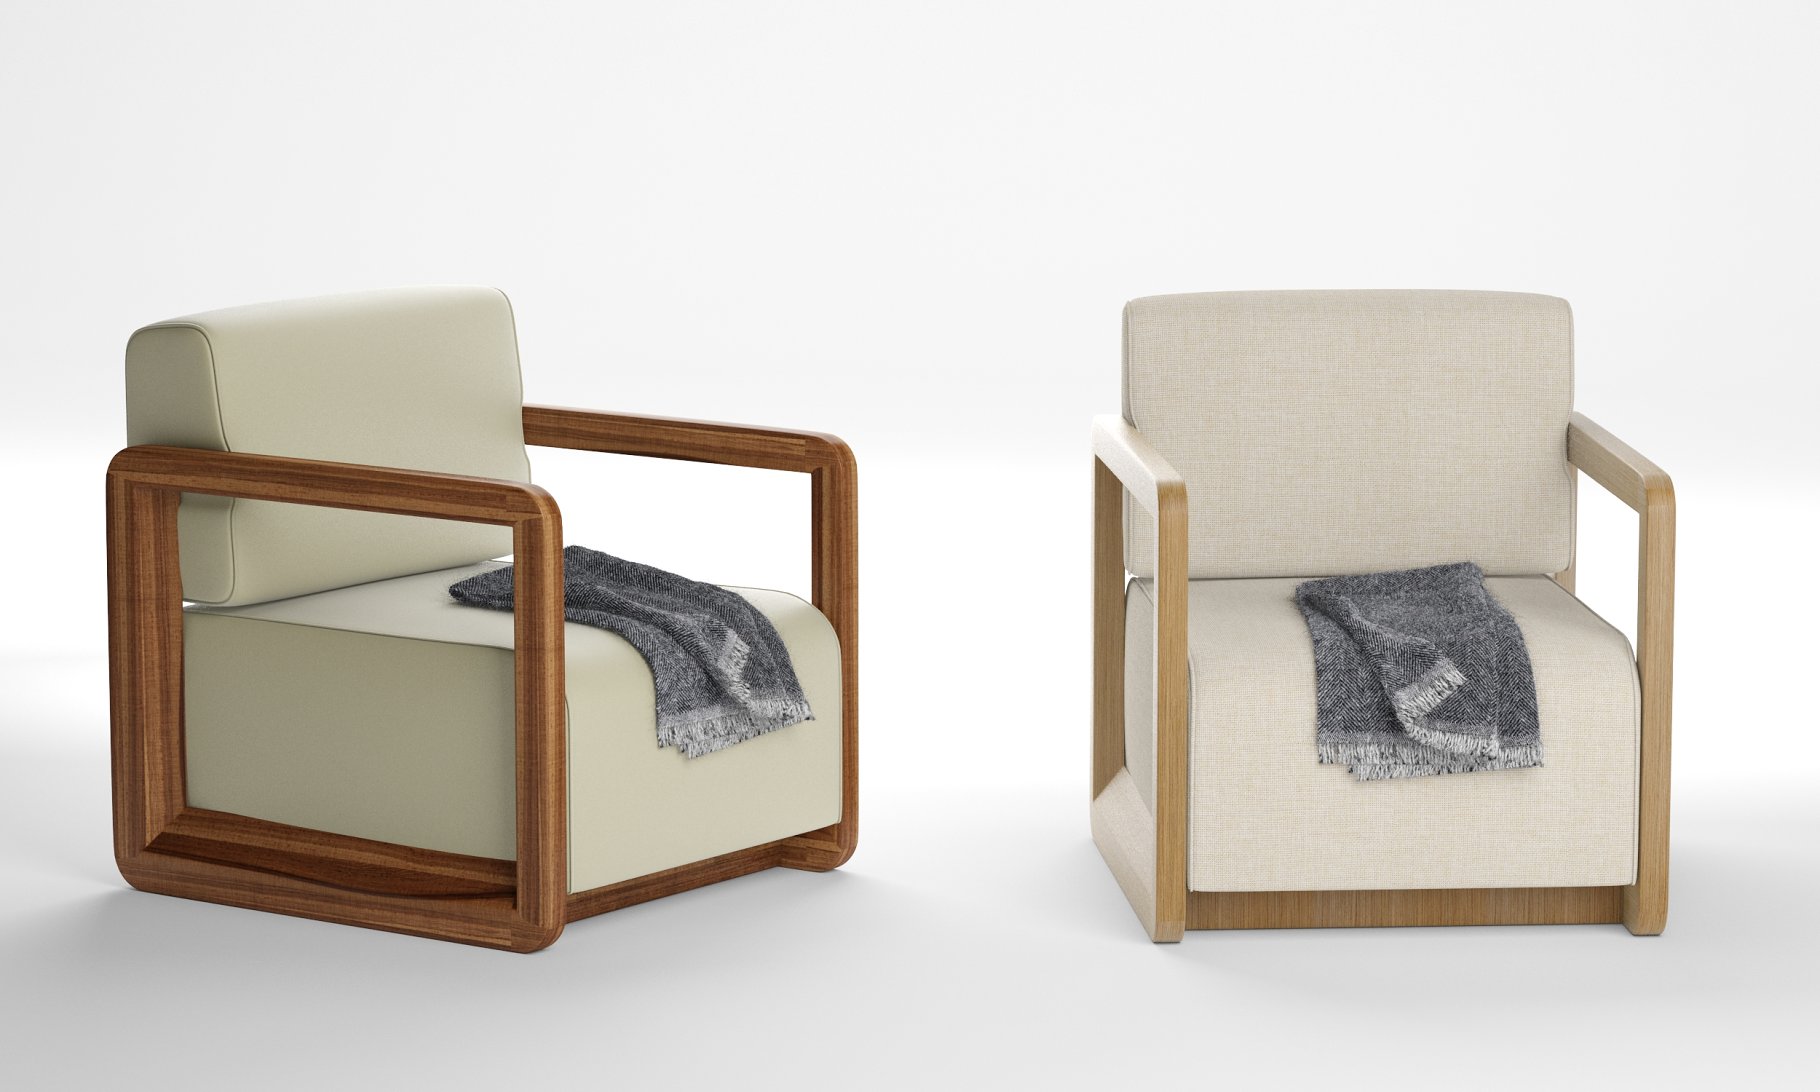 Rendering of an irresistible 3d model of an upholstered chair